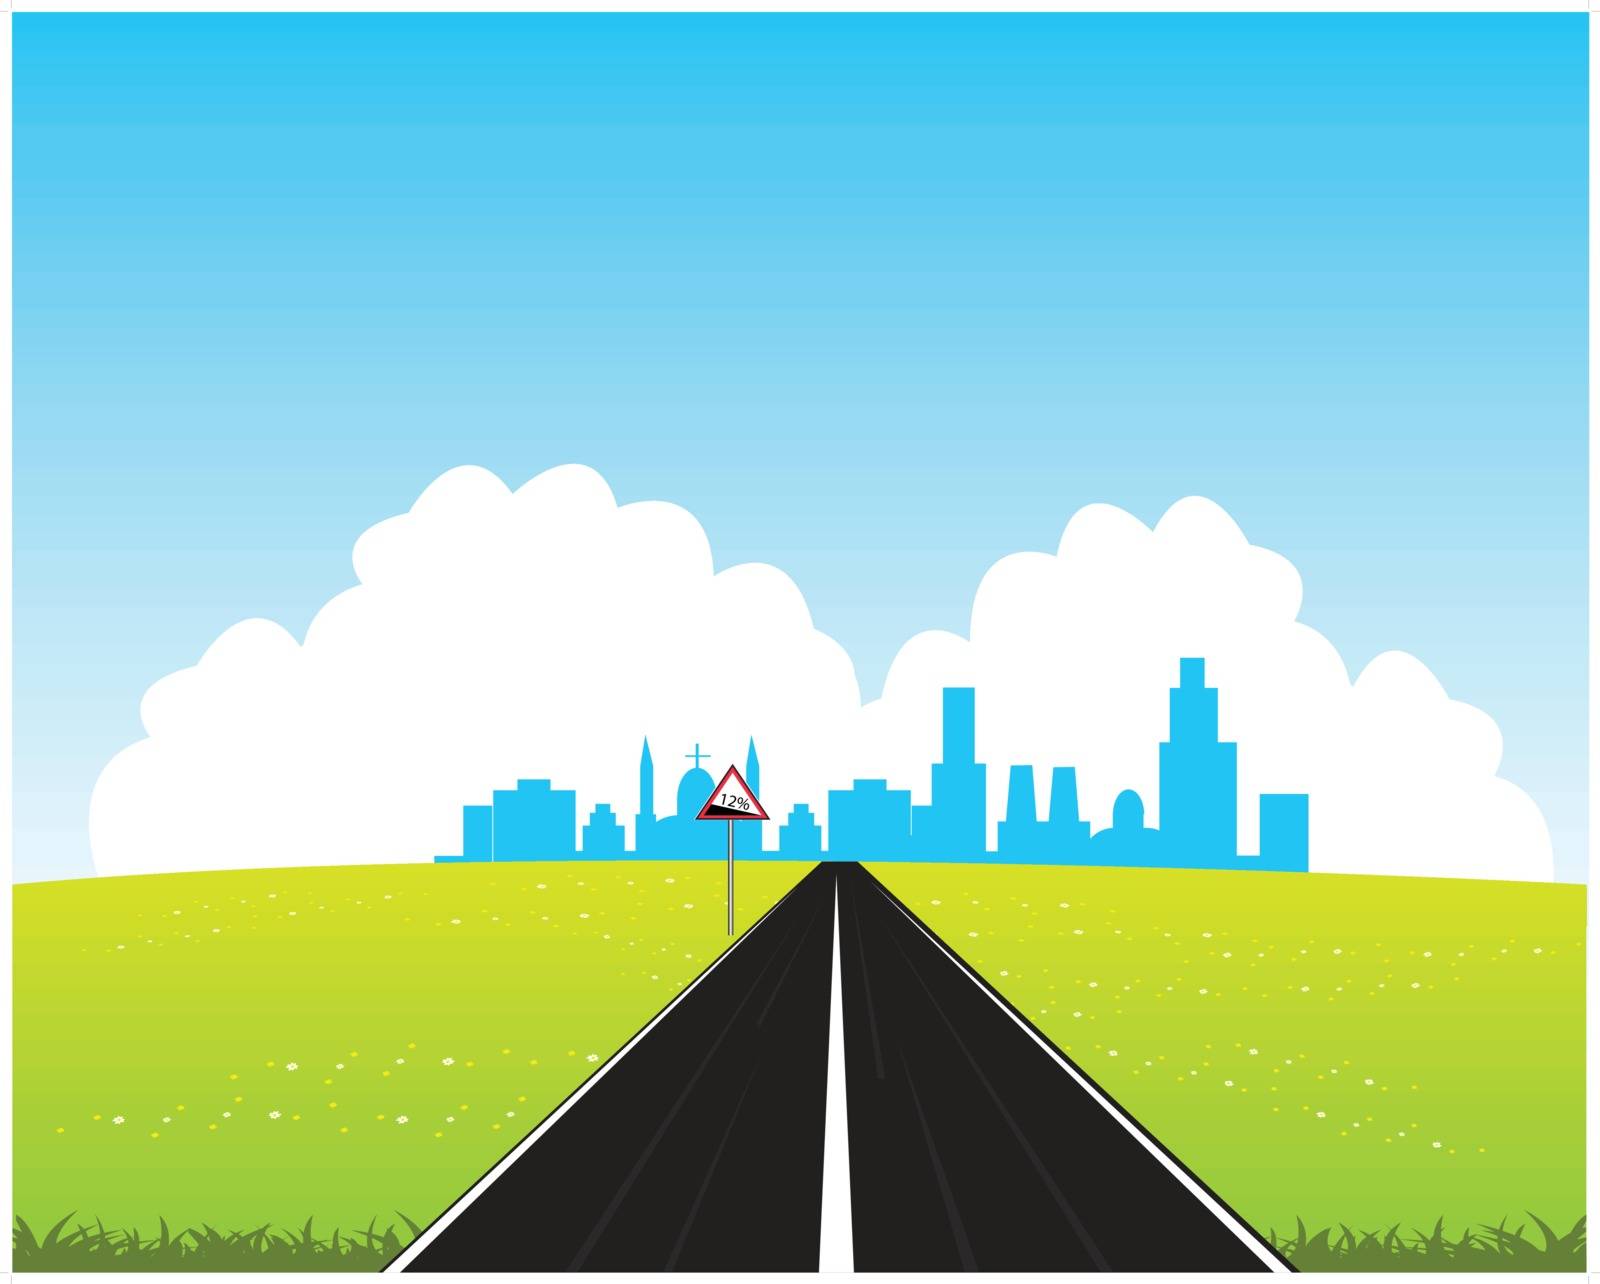 Vector illustration of the road in big city